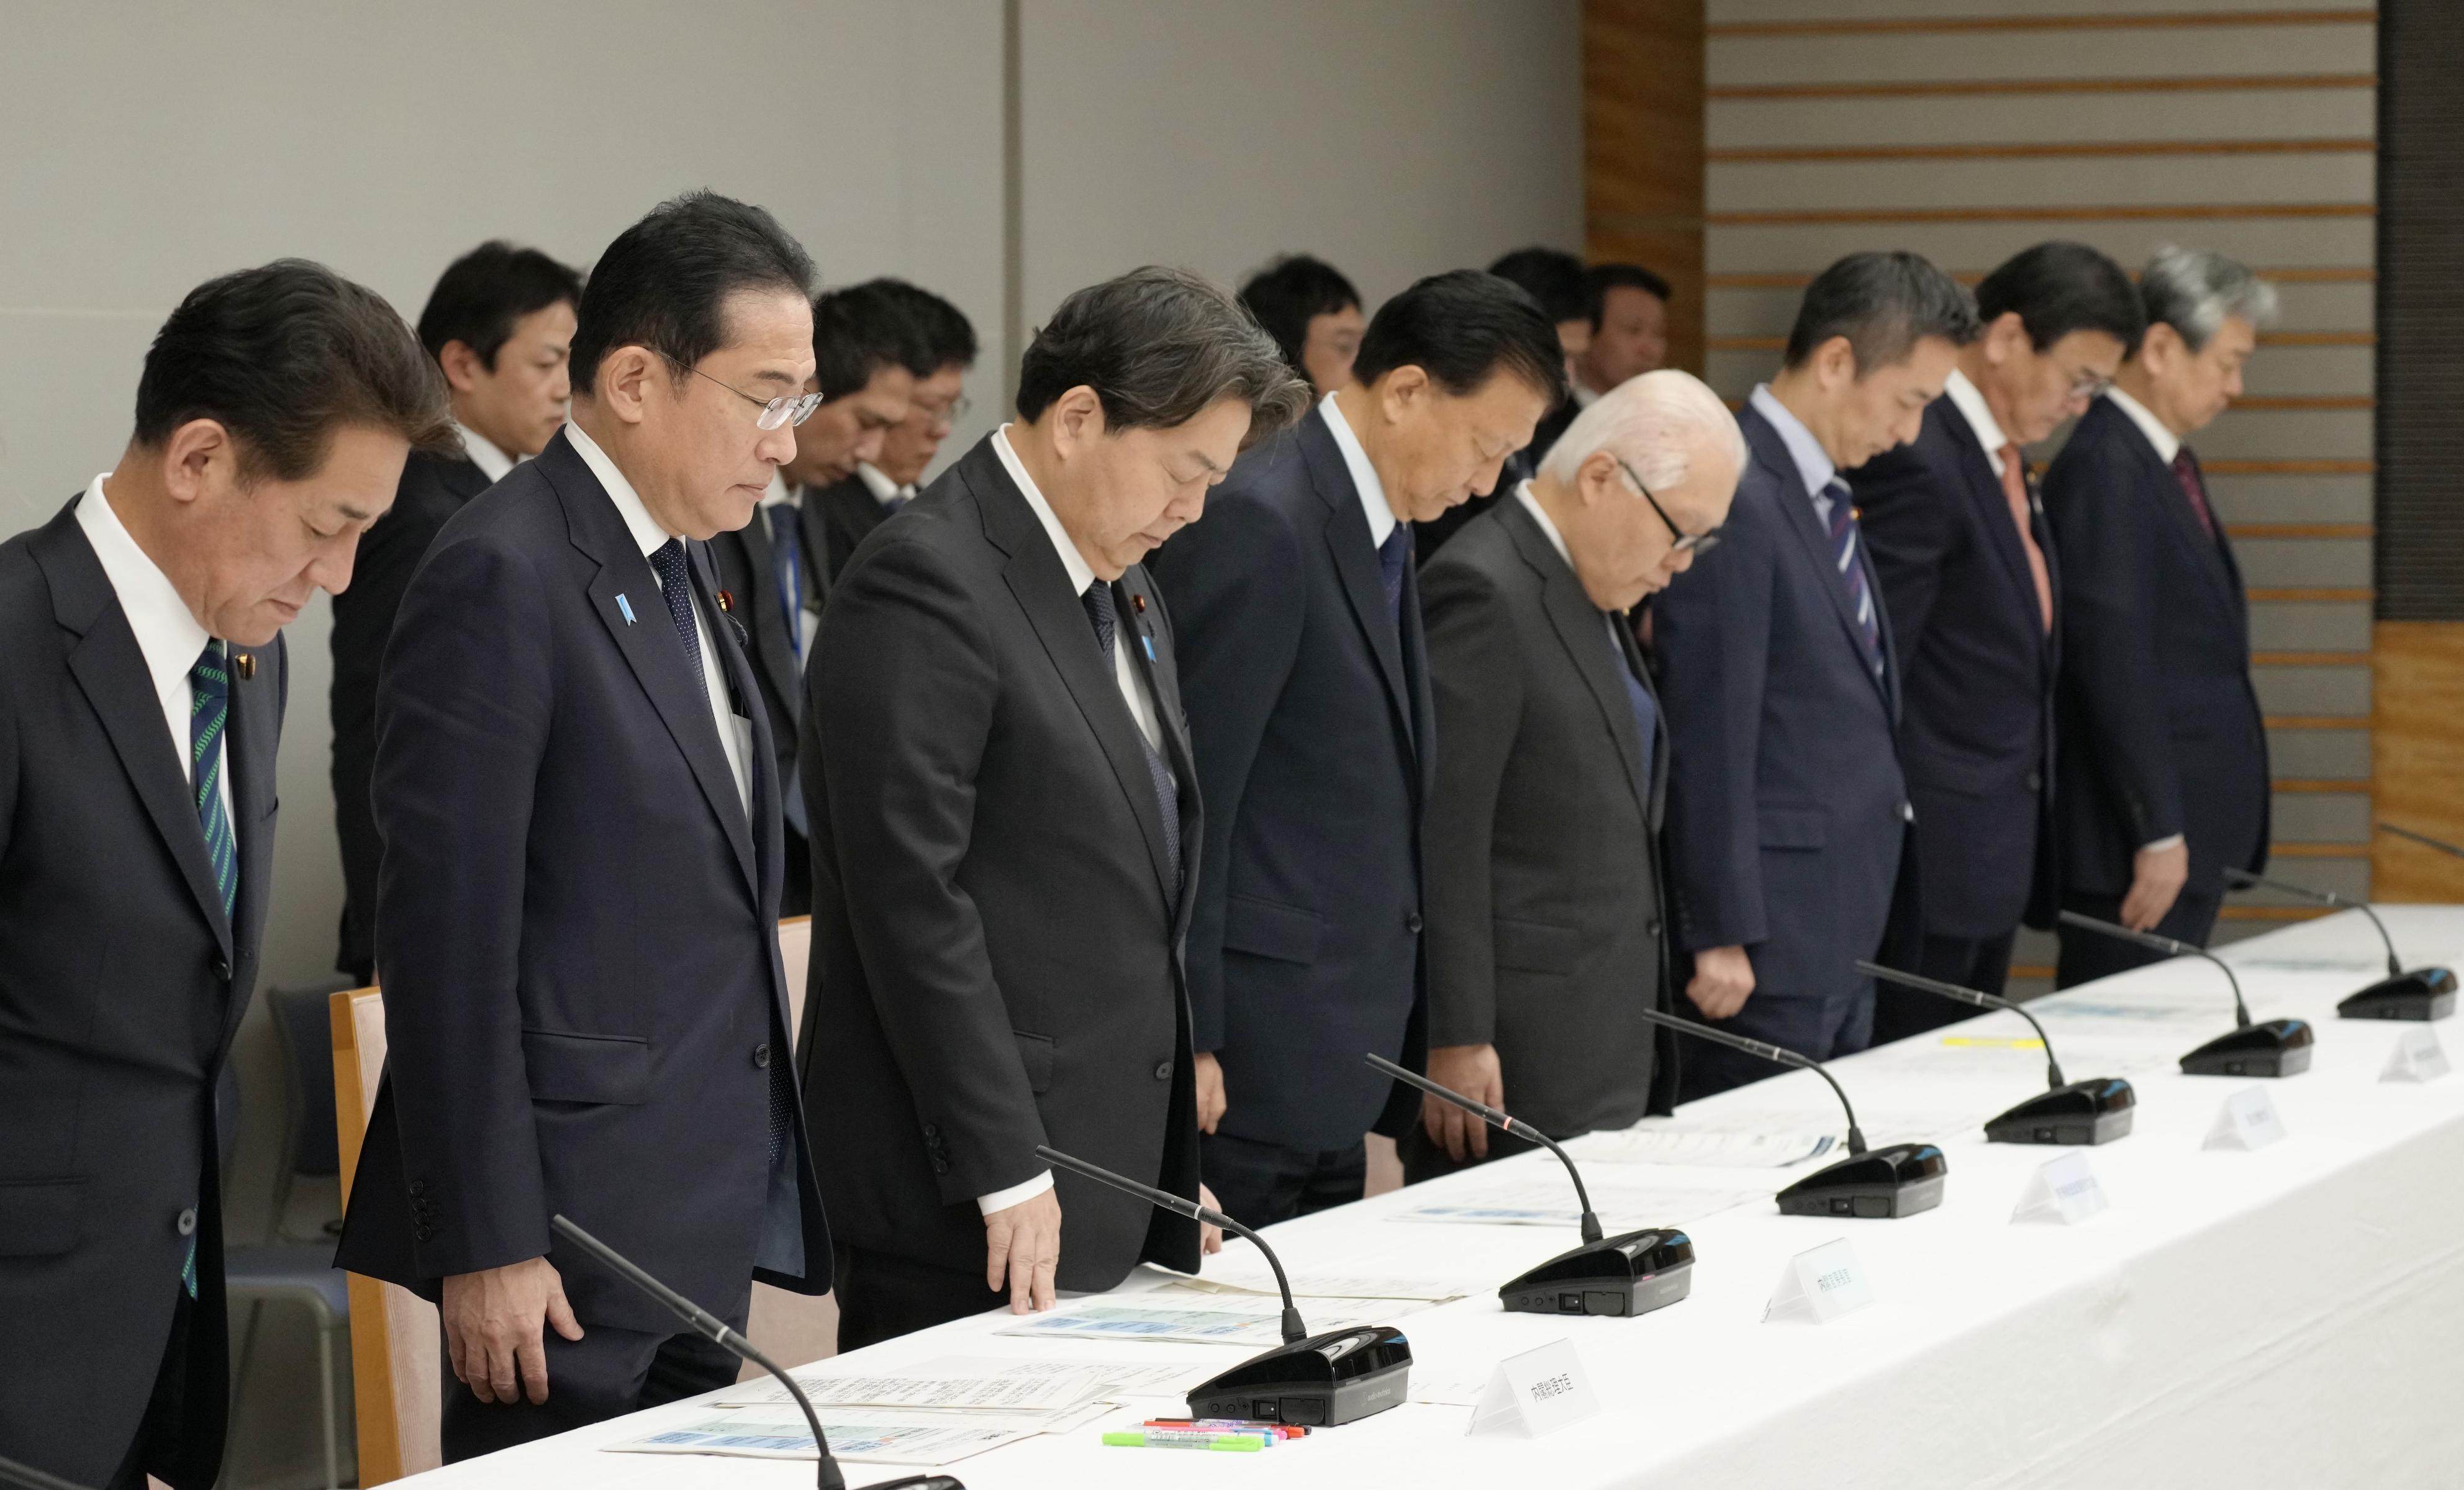 Japanese Prime Minister Fumio Kishida (2nd from left) and other officials offer a silent prayer during the inaugural meeting of a government task force on rebuilding central Japan areas damaged by the New Year’s Day earthquake. The approval rating of the Kishida cabinet hit an all-time low in December last year at 22.3 per cent. Photo: Kyodo